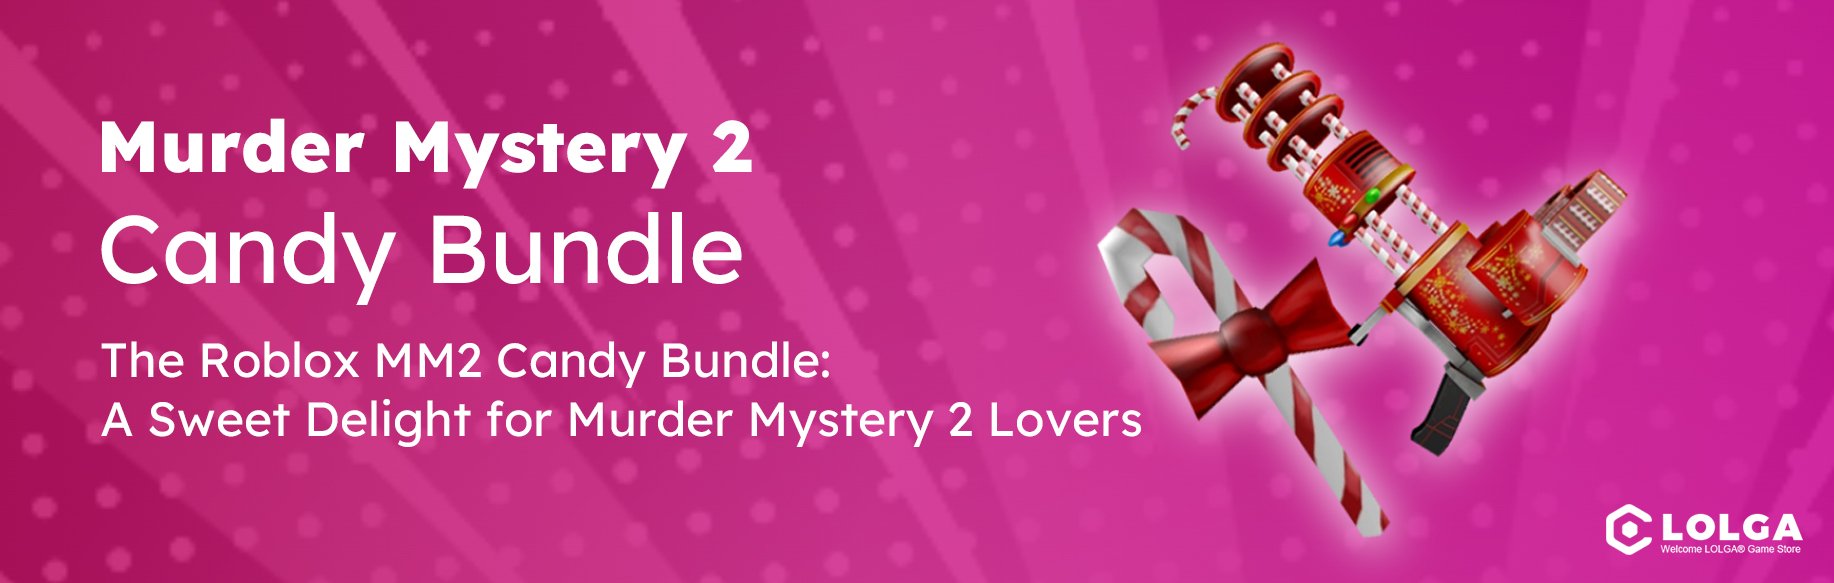 The Roblox MM2 Candy Bundle: A Sweet Delight for Murder Mystery 2 Lovers